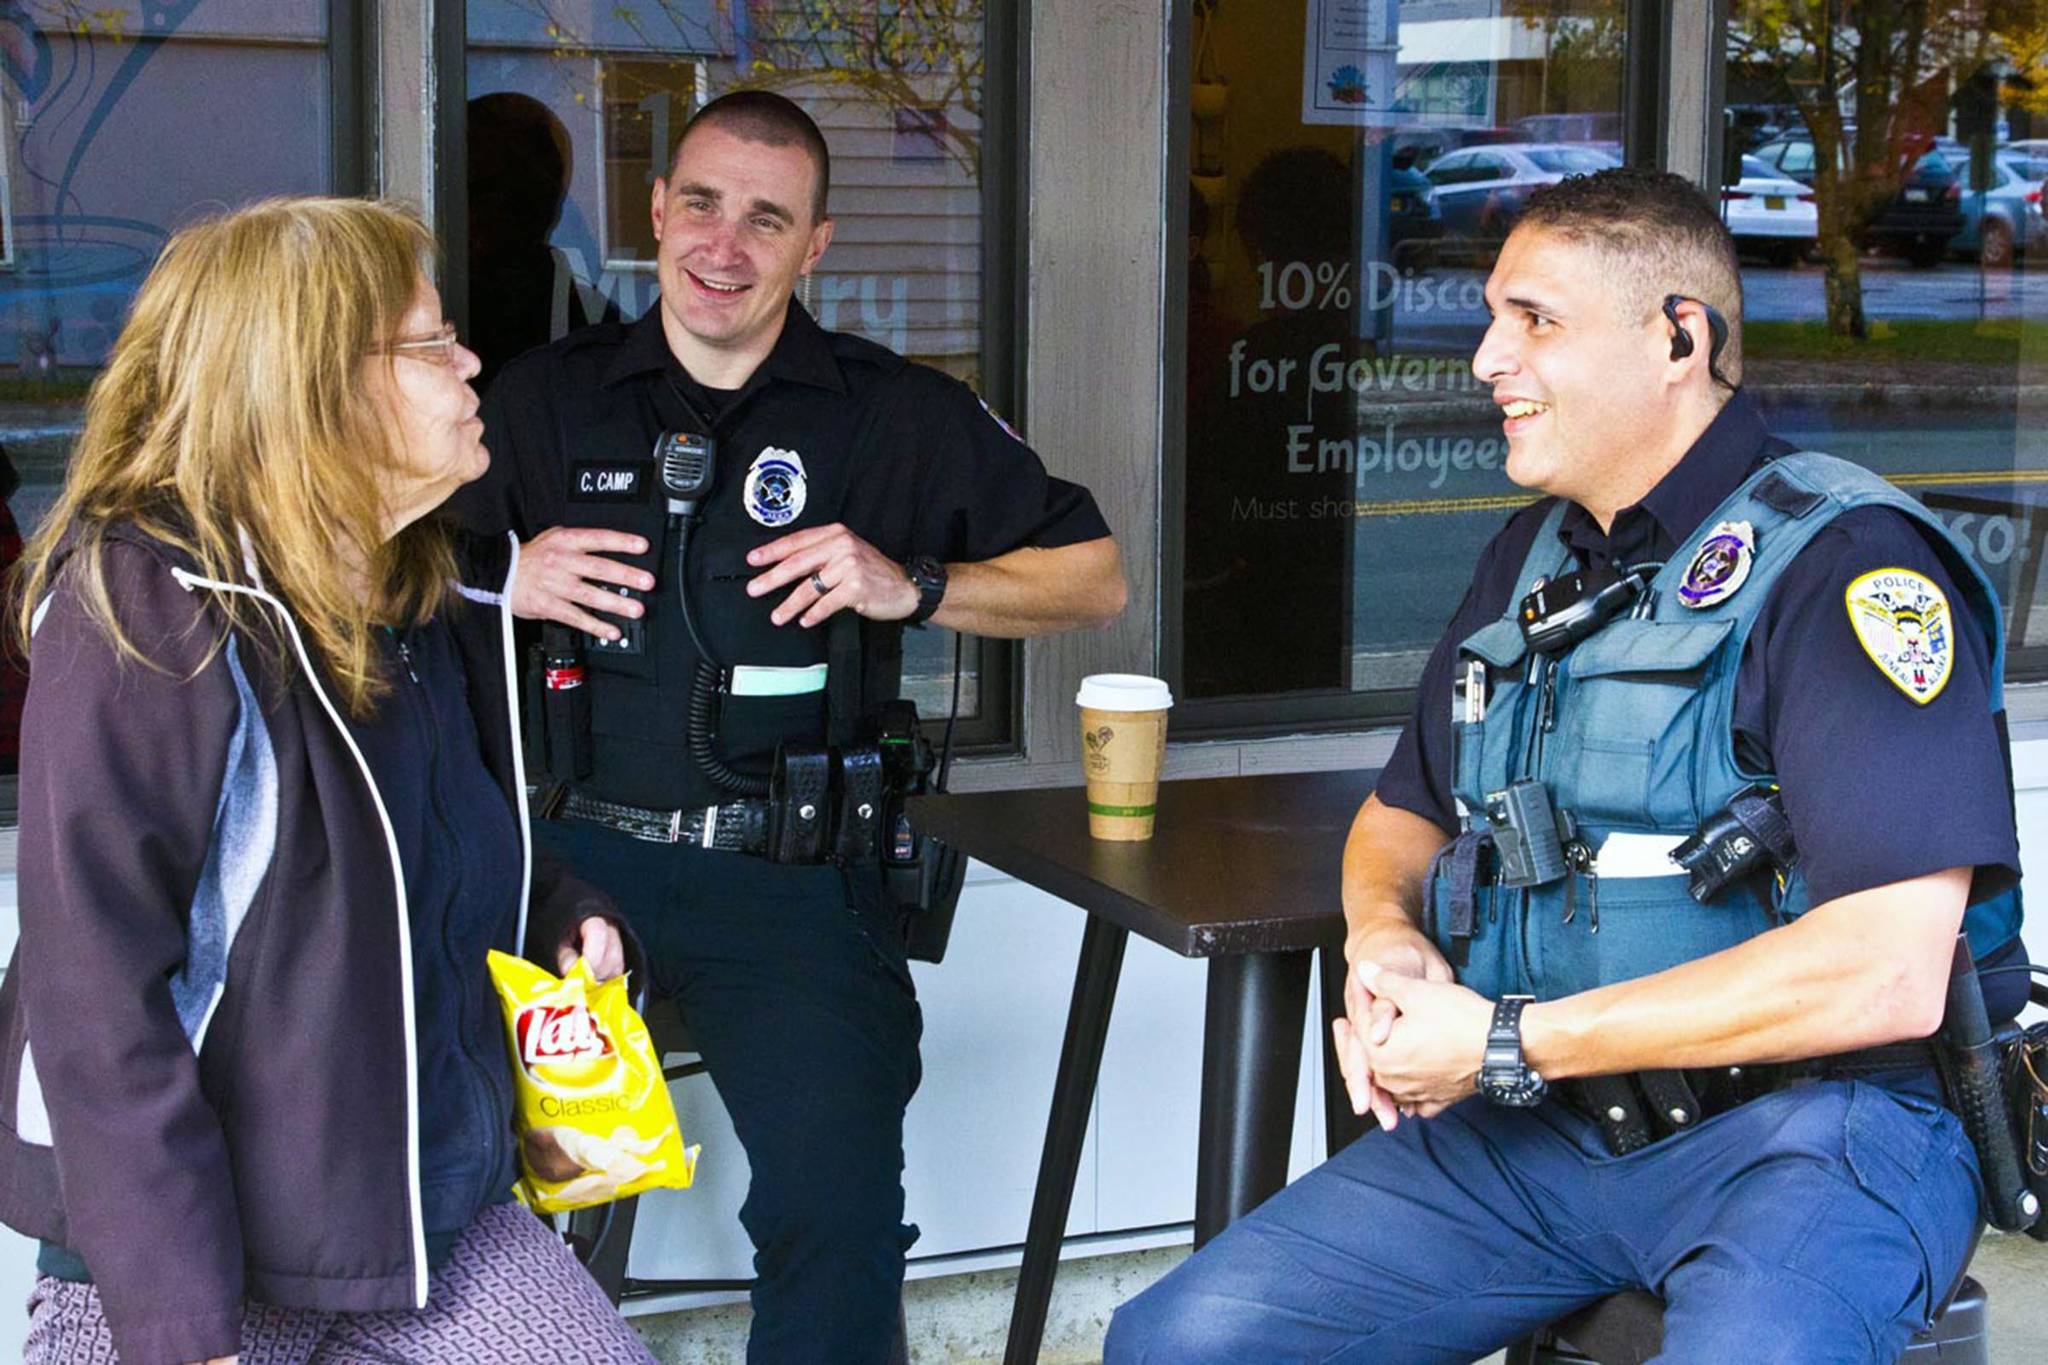 Juneau Police Department Officers Casey Camp and Ken Colon took part in Coffee with a Cop at Sacred Grounds, a yearly event where they hang out with Juneau residents in a coffee shop, on Oct. 2, 2019. (Michael S. Lockett | Juneau Empire)